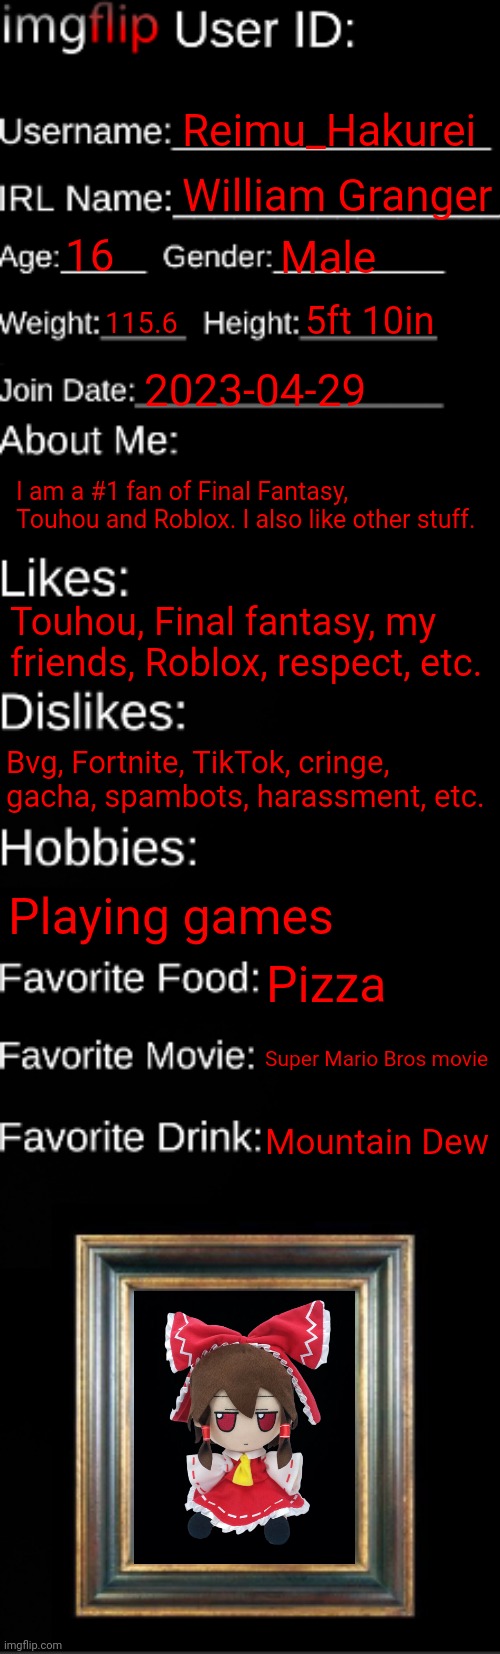 imgflip ID Card | Reimu_Hakurei; William Granger; 16; Male; 5ft 10in; 115.6; 2023-04-29; I am a #1 fan of Final Fantasy, Touhou and Roblox. I also like other stuff. Touhou, Final fantasy, my friends, Roblox, respect, etc. Bvg, Fortnite, TikTok, cringe, gacha, spambots, harassment, etc. Playing games; Pizza; Super Mario Bros movie; Mountain Dew | image tagged in imgflip id card | made w/ Imgflip meme maker